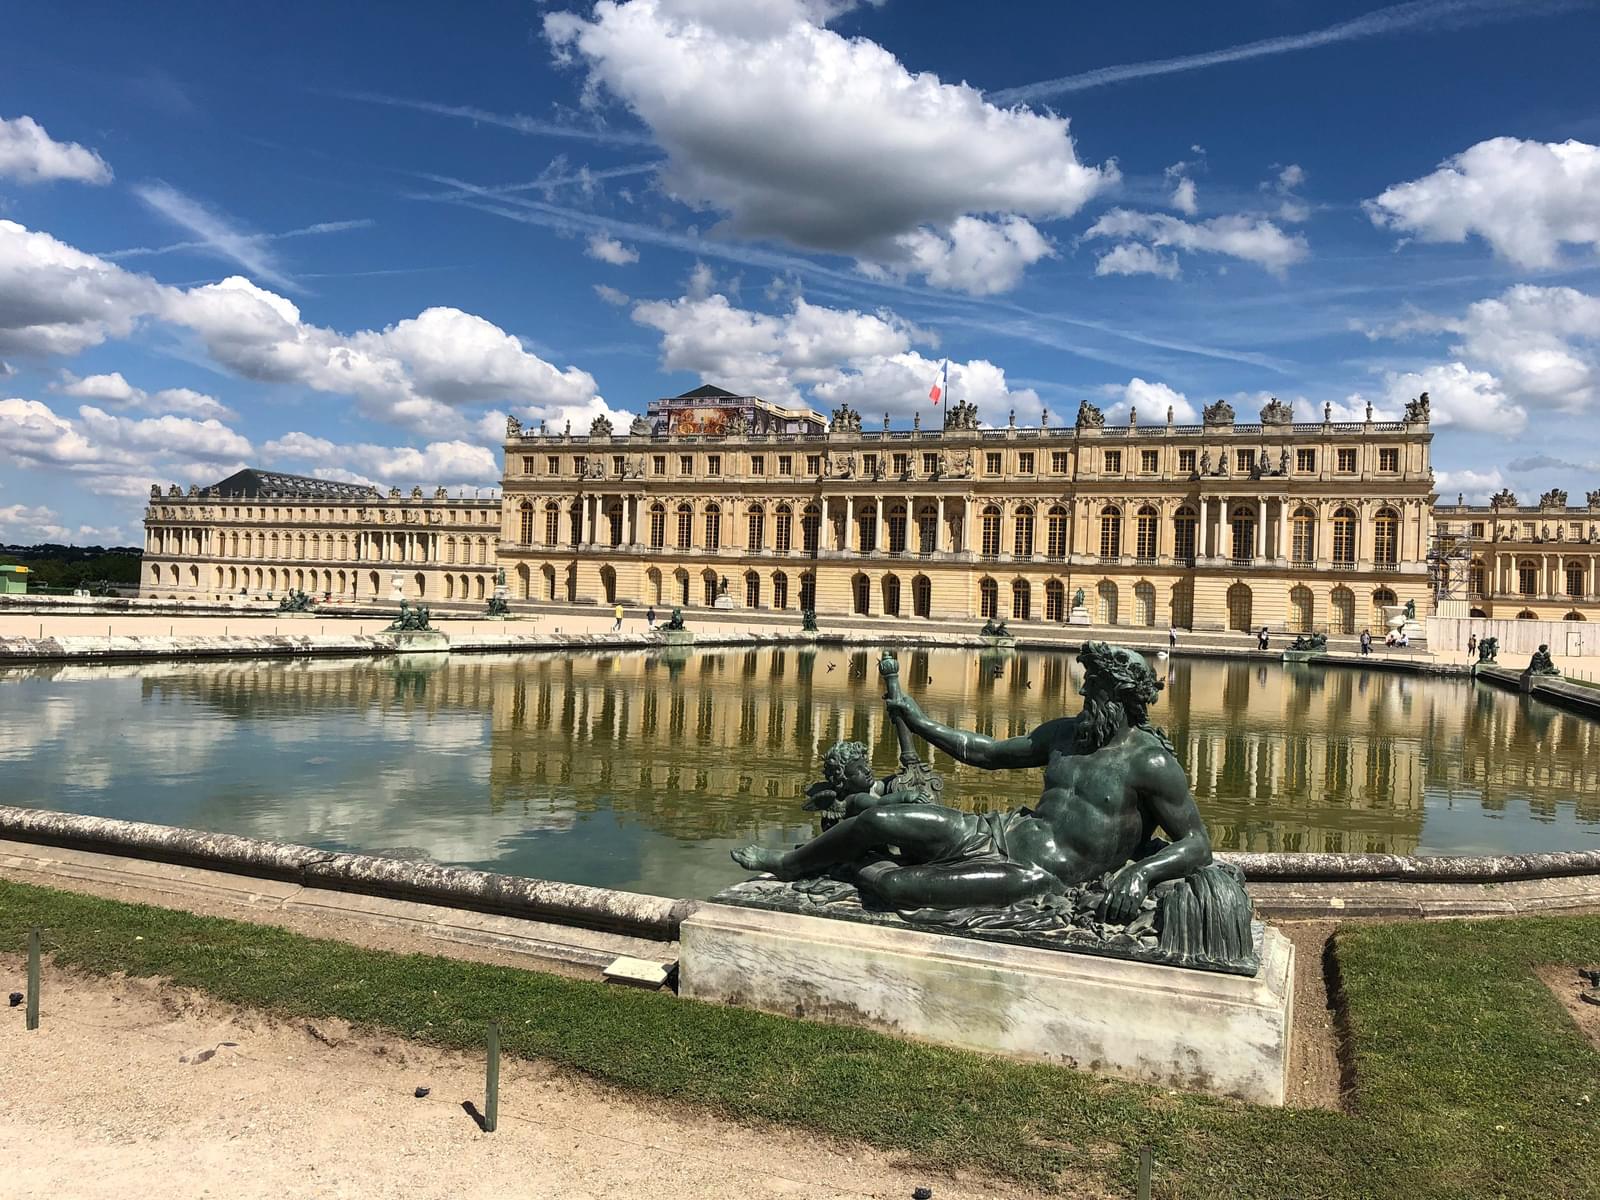 Explore the Palace of Versailles